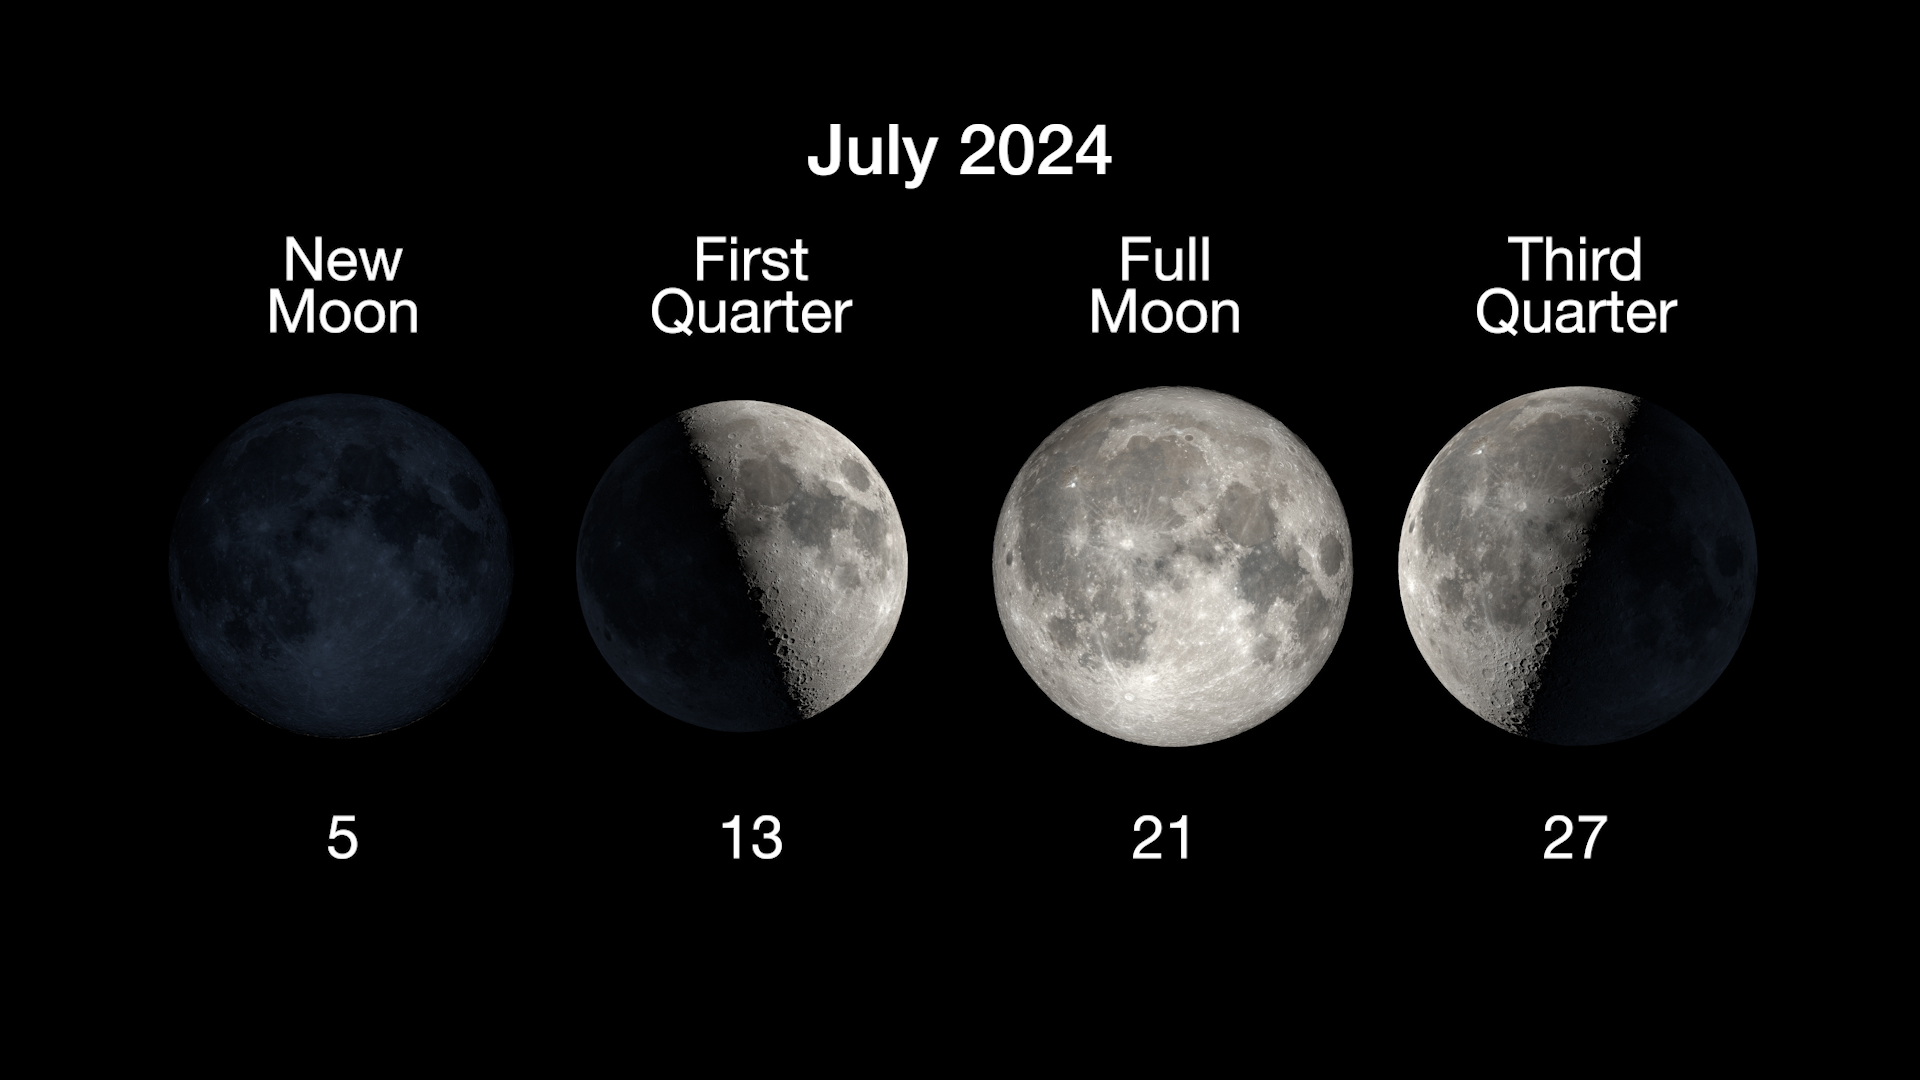 The main phases of the Moon are illustrated in a horizontal row, with the new moon on July 5th, first quarter on July 13th, full moon on July 21st, and the third quarter moon on July 27th.